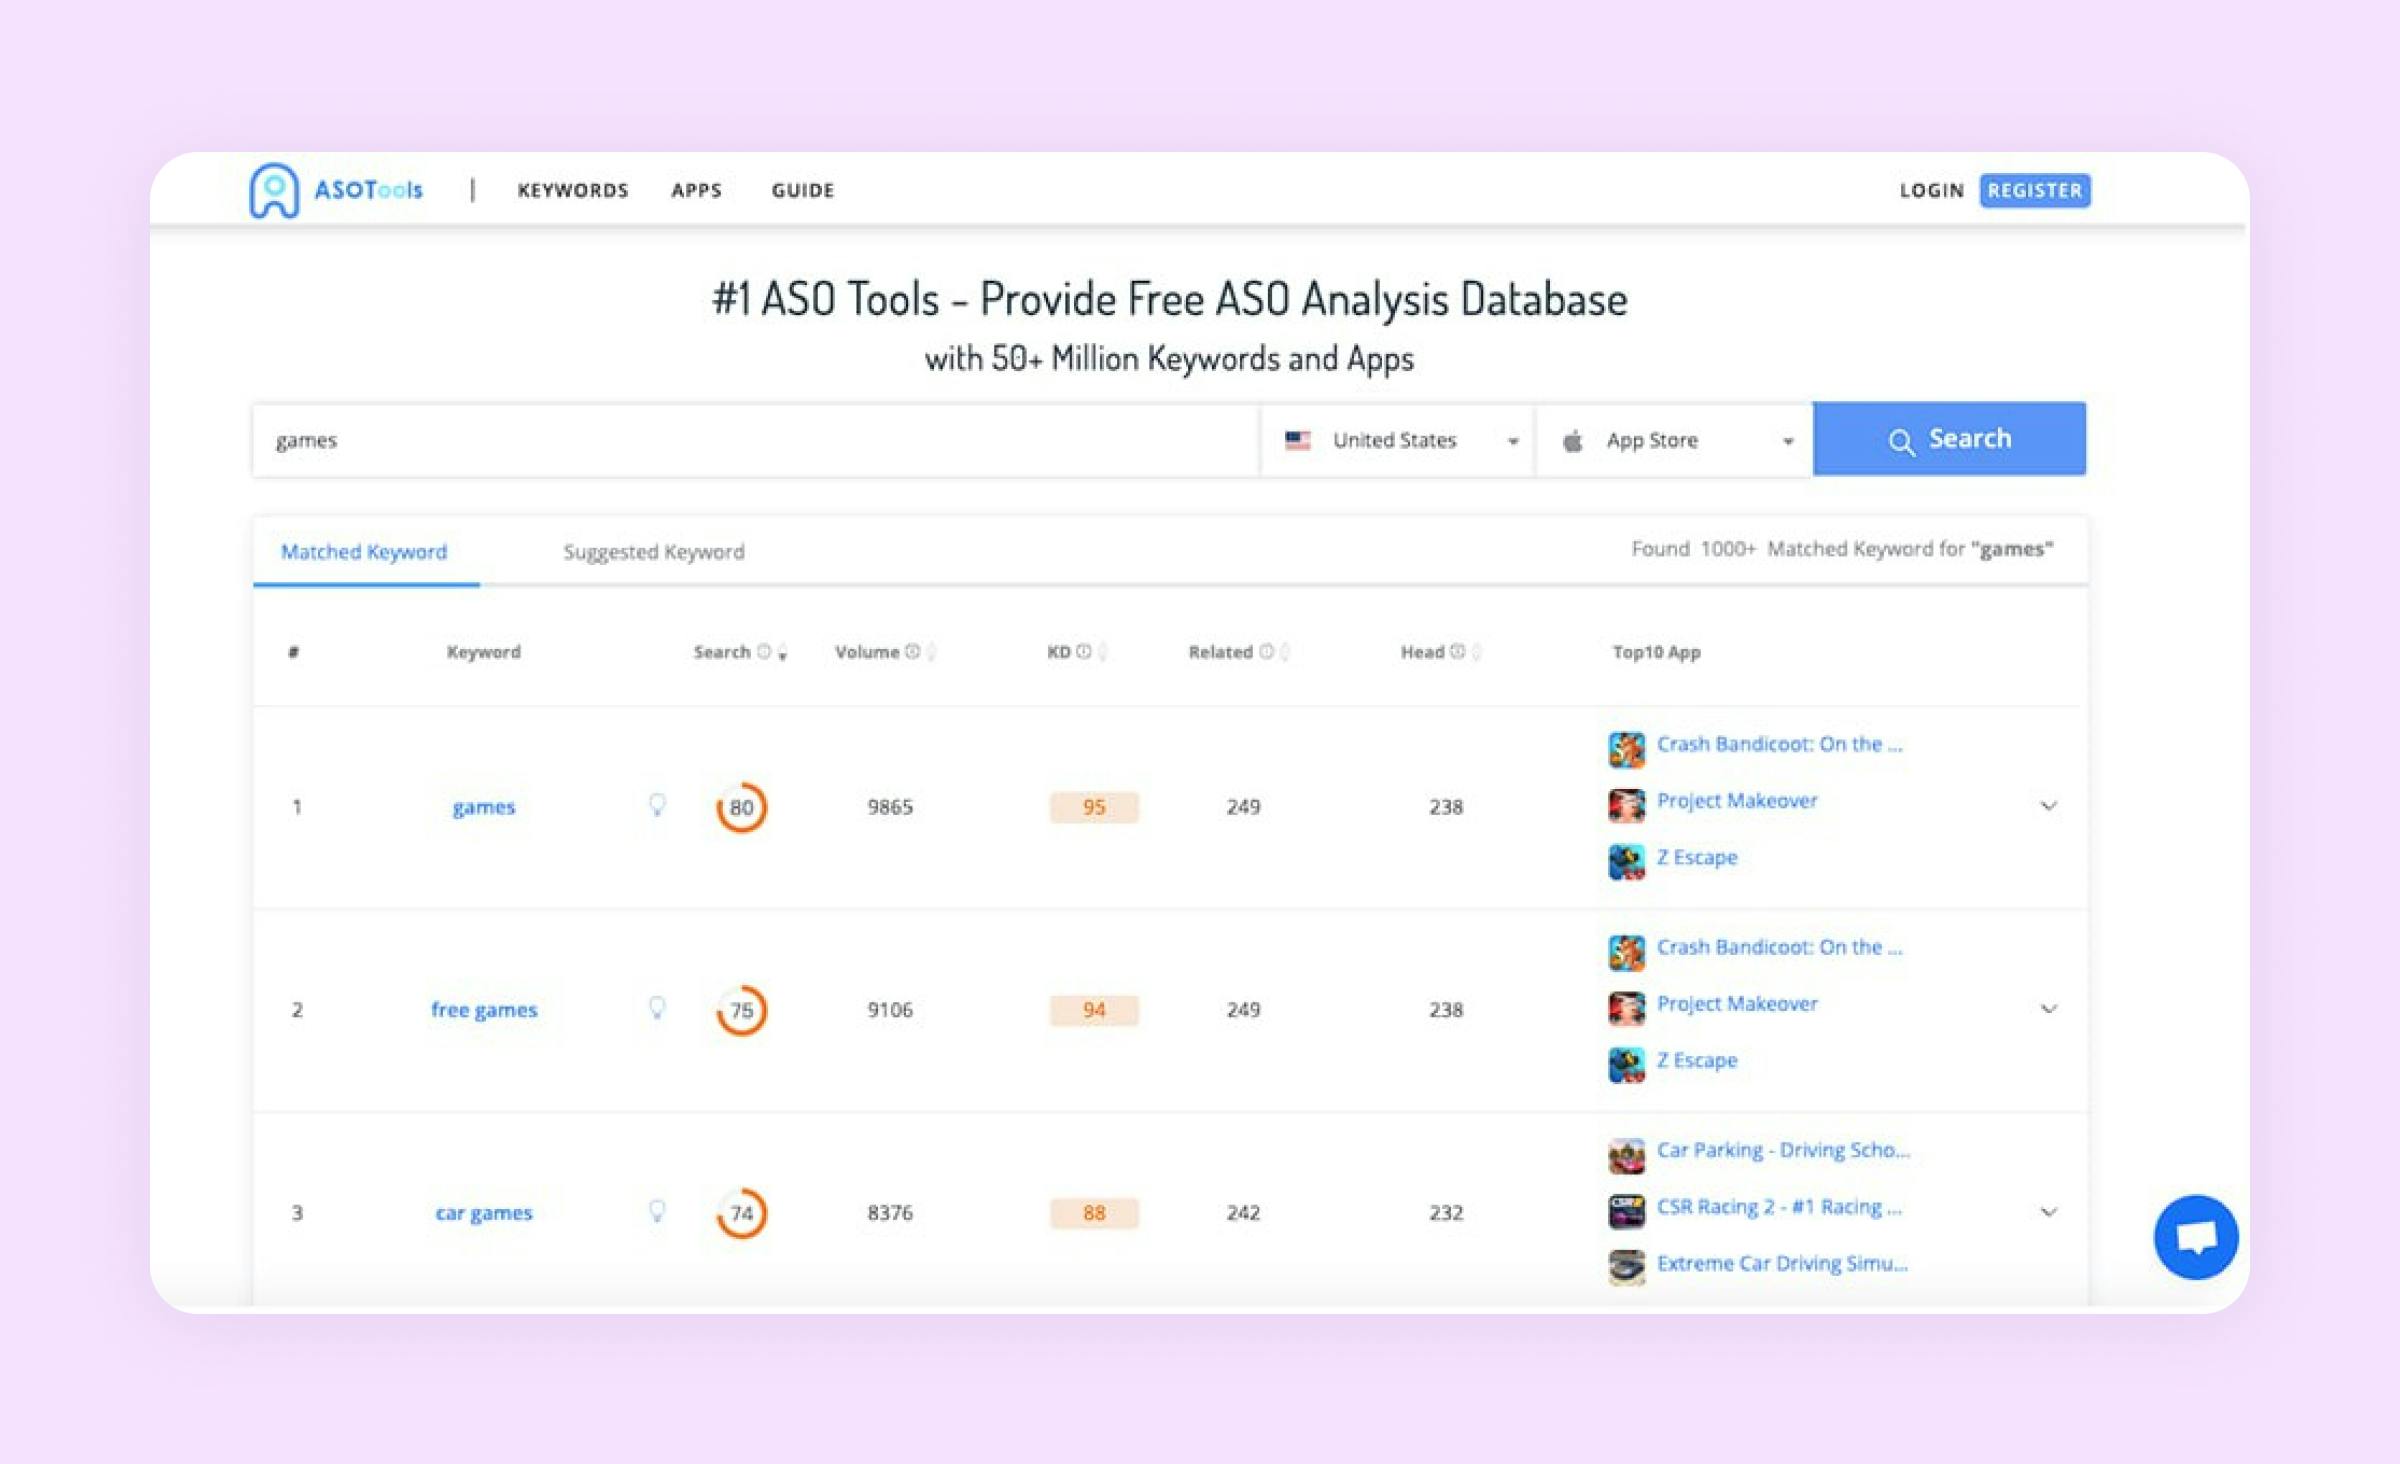 ASOTools is a popular app store optimization tool to increase app downloads for startups